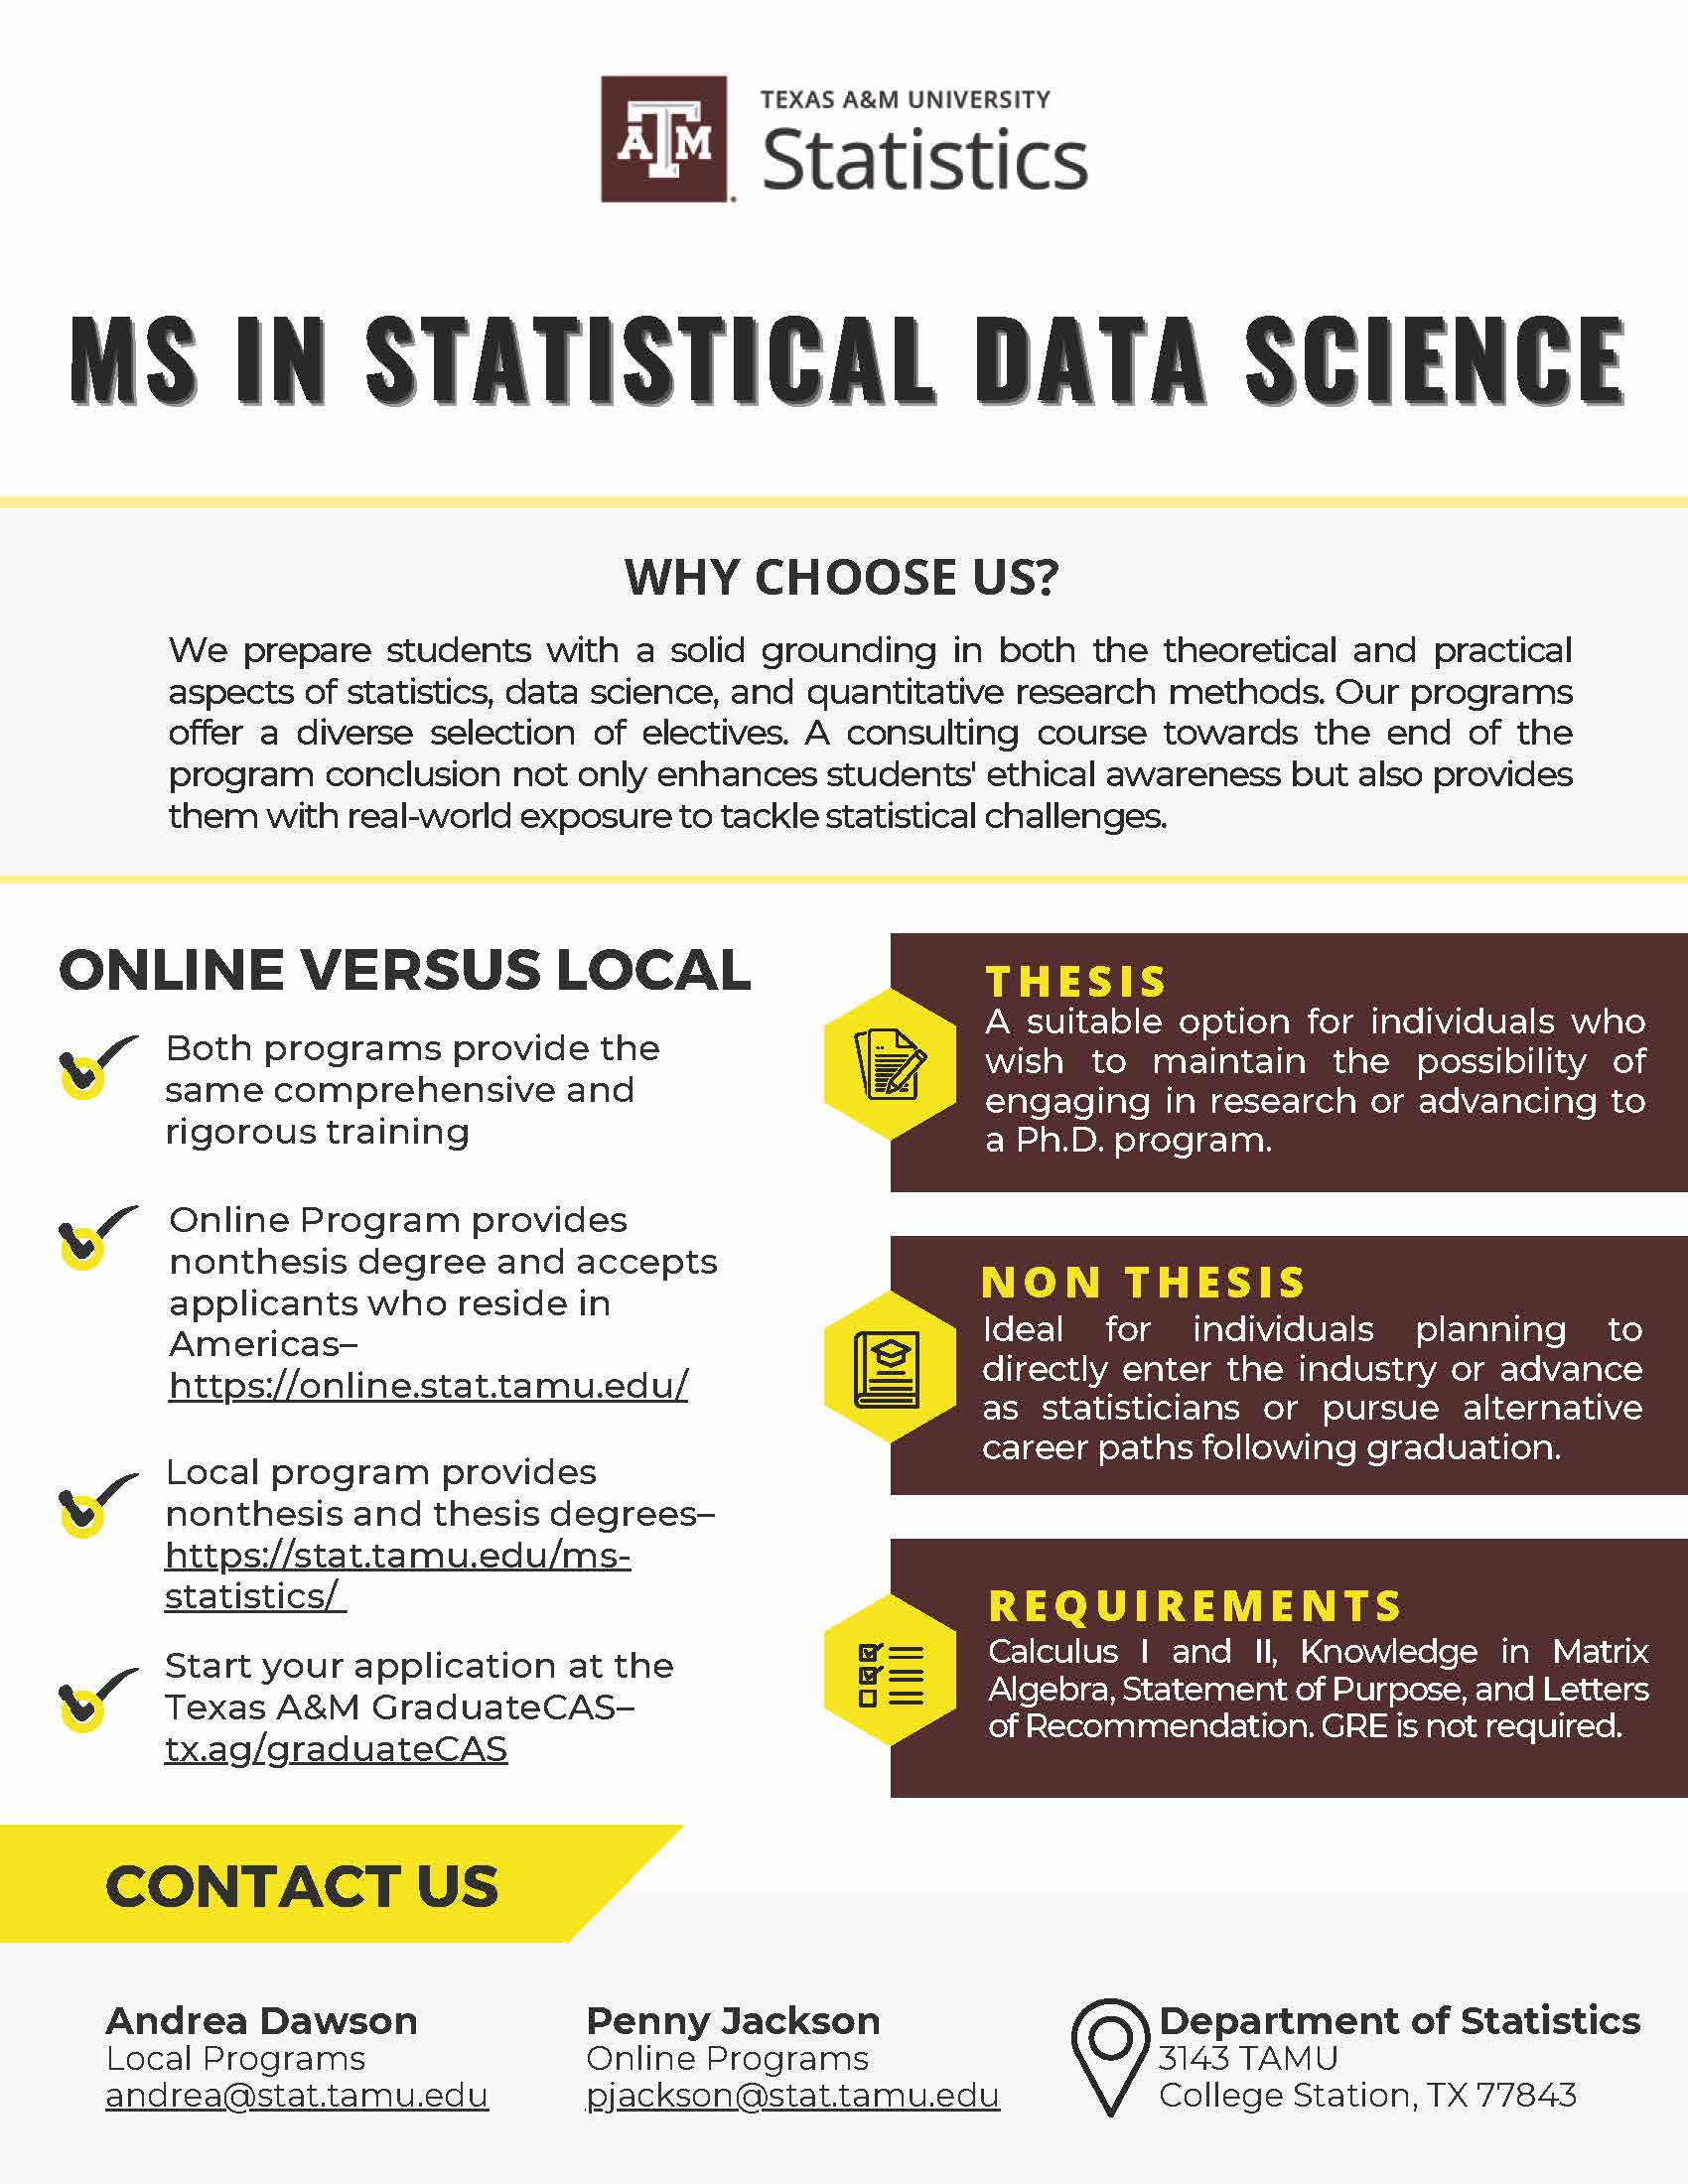 MS IN Statistical Data Science Information Session